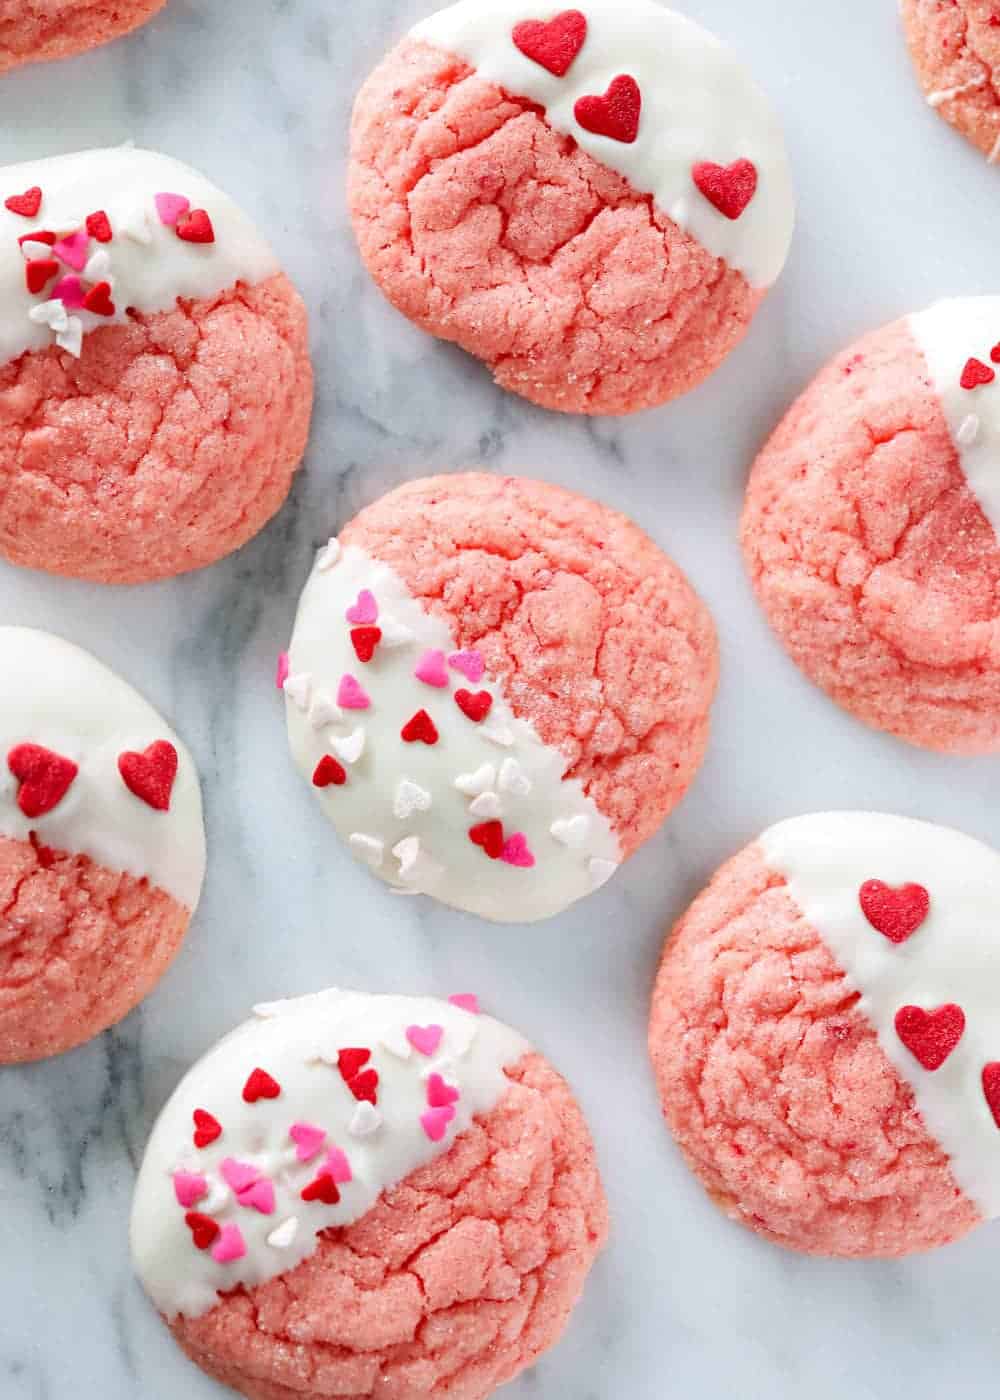 Chocolate Dipped Strawberry Cookies ...made with only 3 ingredients! These make the perfect Valentine's Day treat!